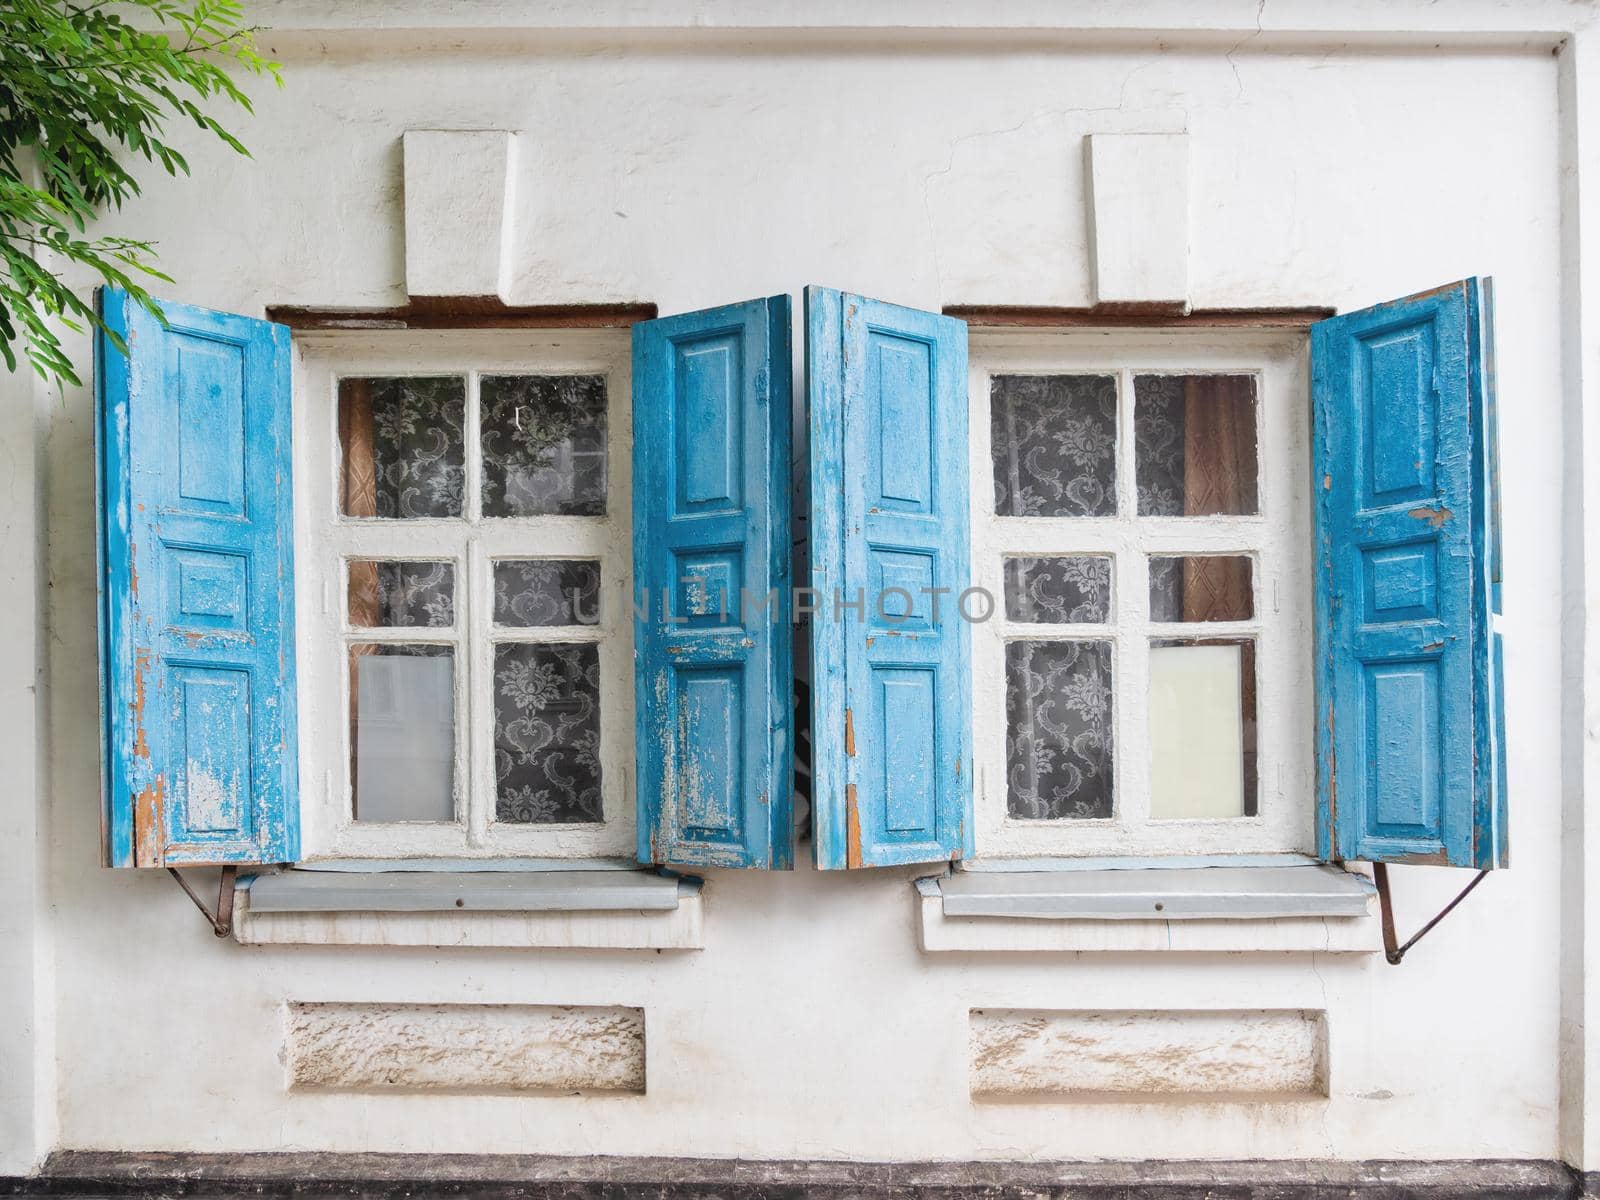 Old building with blue shutters on windows and old fashioned tulle curtains. White stone walls with retro architectural details. by aksenovko